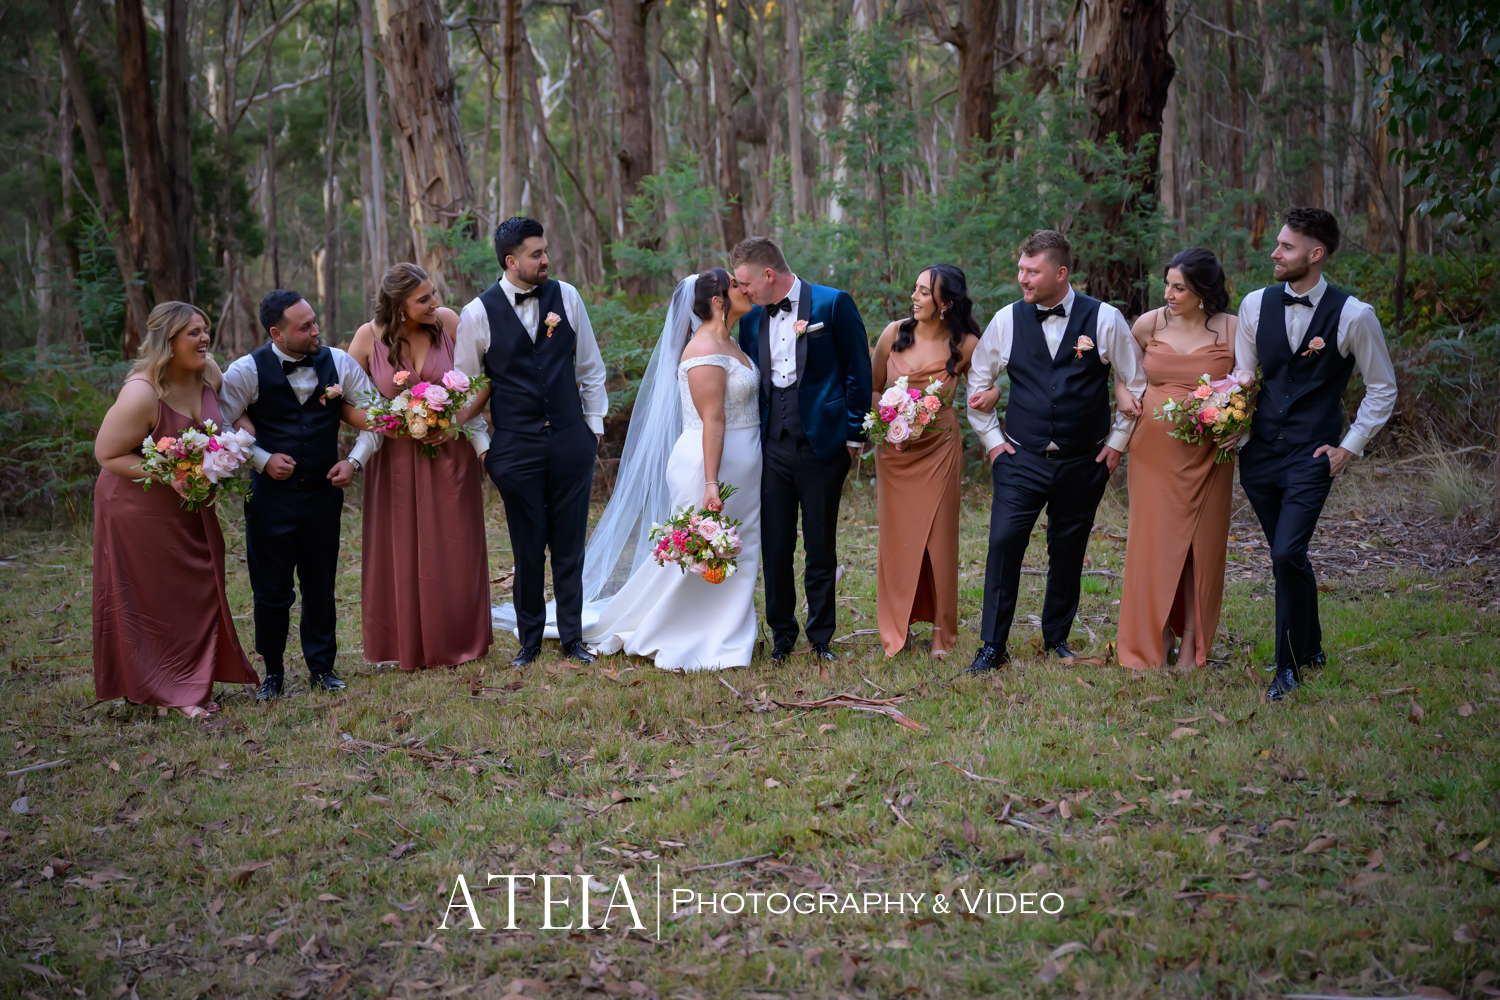 , Nicole and Adrian&#8217;s wedding at The Burrow Daylesford captured by ATEIA Photography &#038; Video